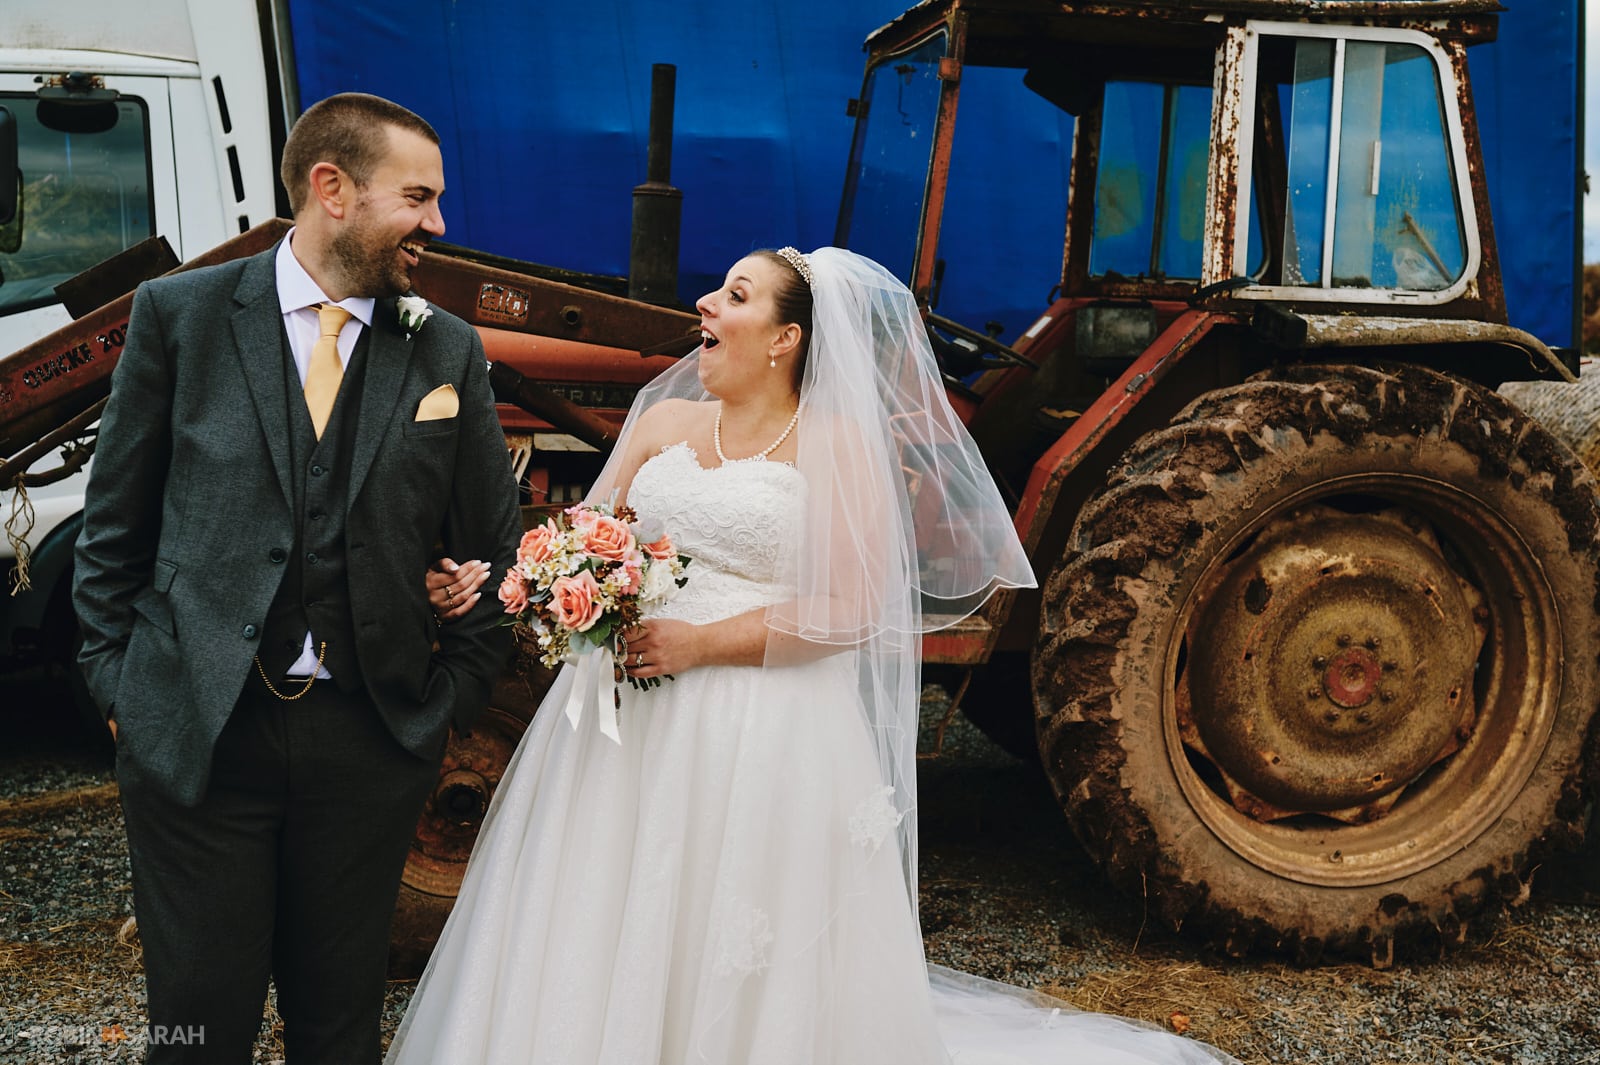 Bride and groom share a laugh in front of old tractor